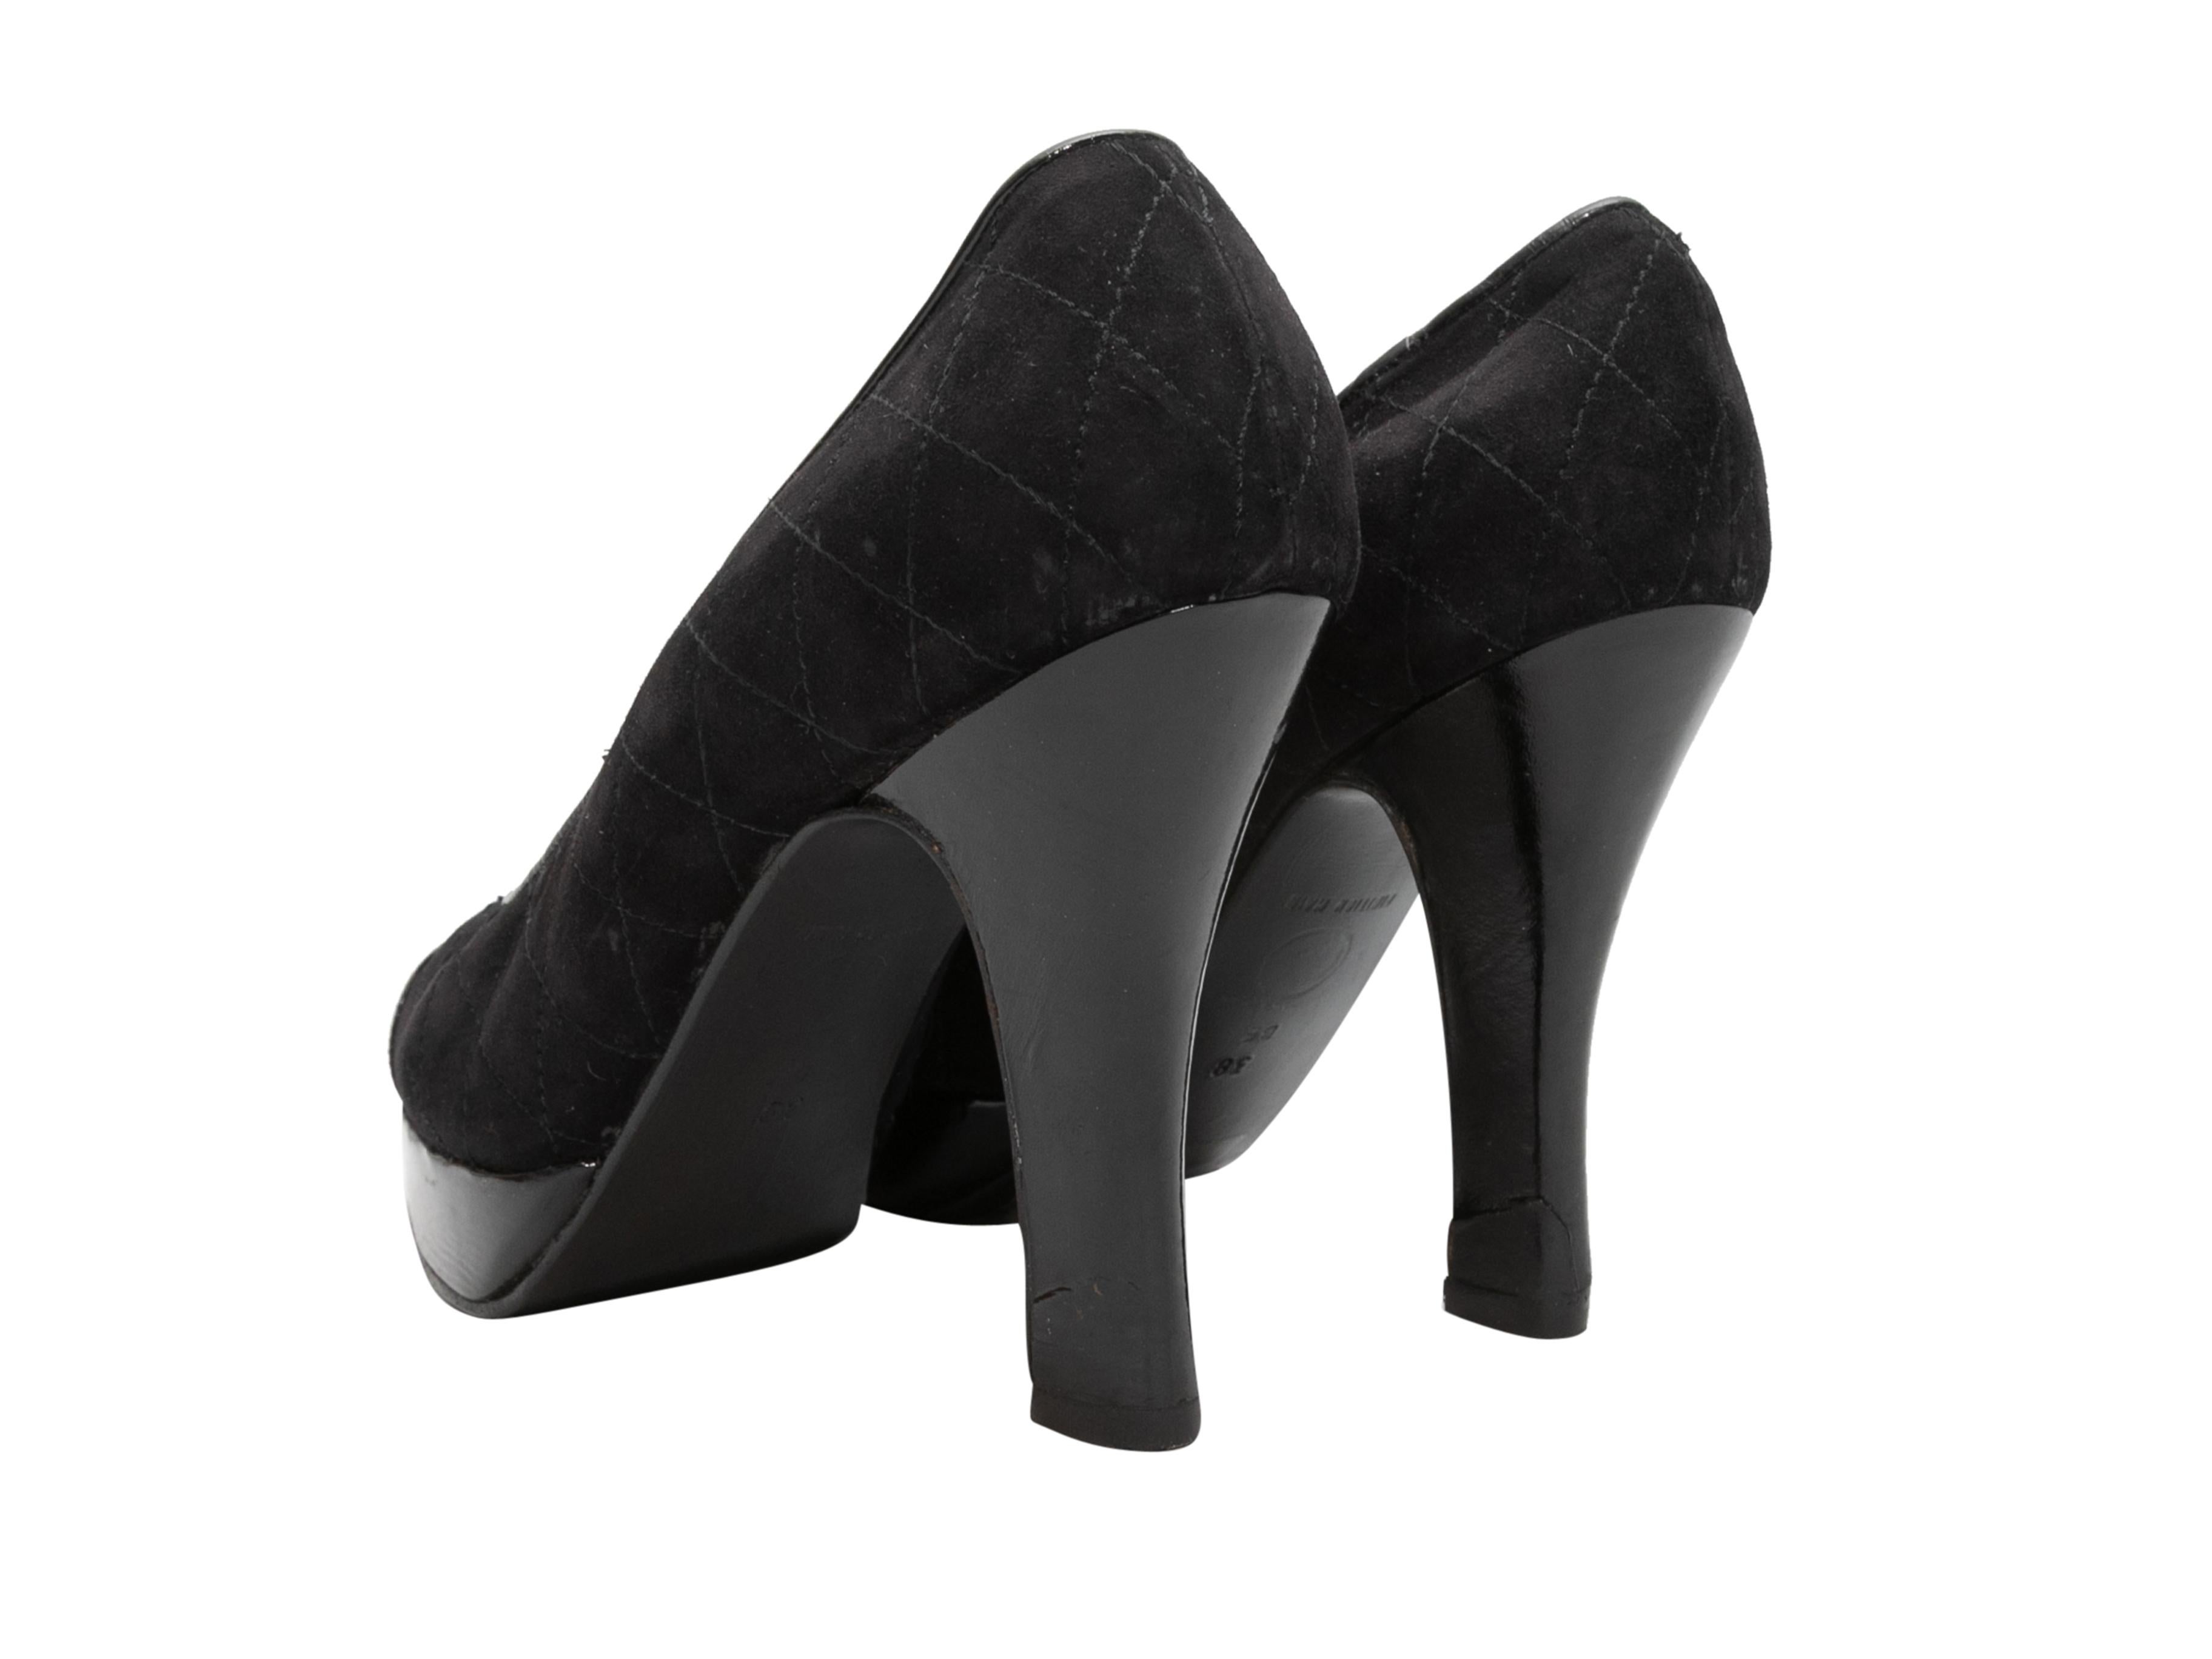 Black quilted suede and patent leather pointed cap-toe platform pumps by Chanel. 1